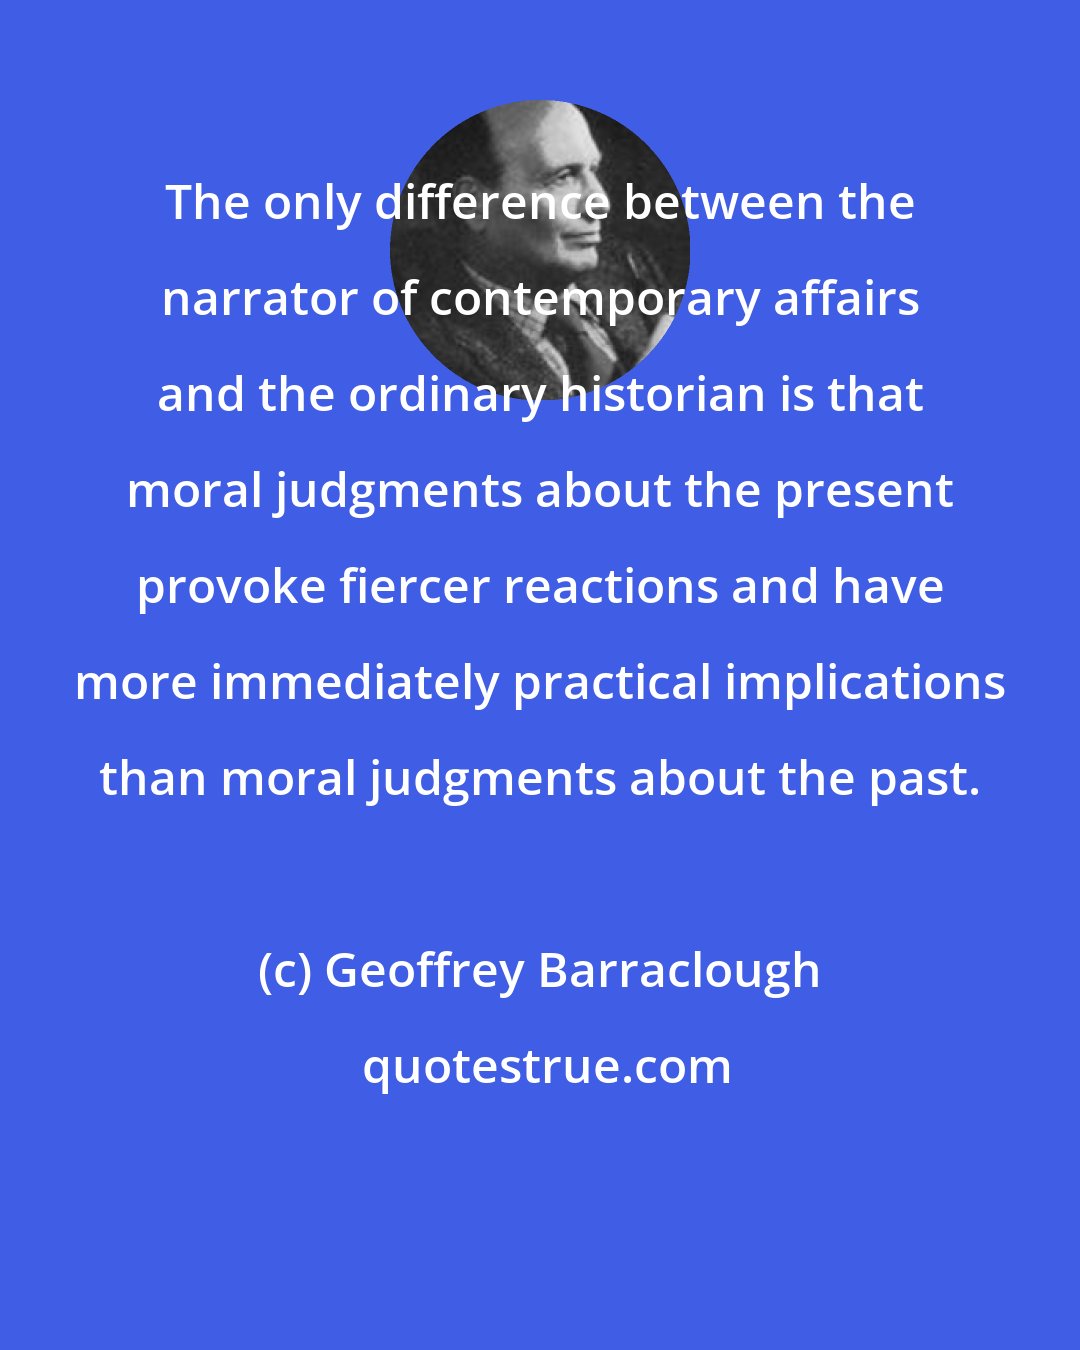 Geoffrey Barraclough: The only difference between the narrator of contemporary affairs and the ordinary historian is that moral judgments about the present provoke fiercer reactions and have more immediately practical implications than moral judgments about the past.